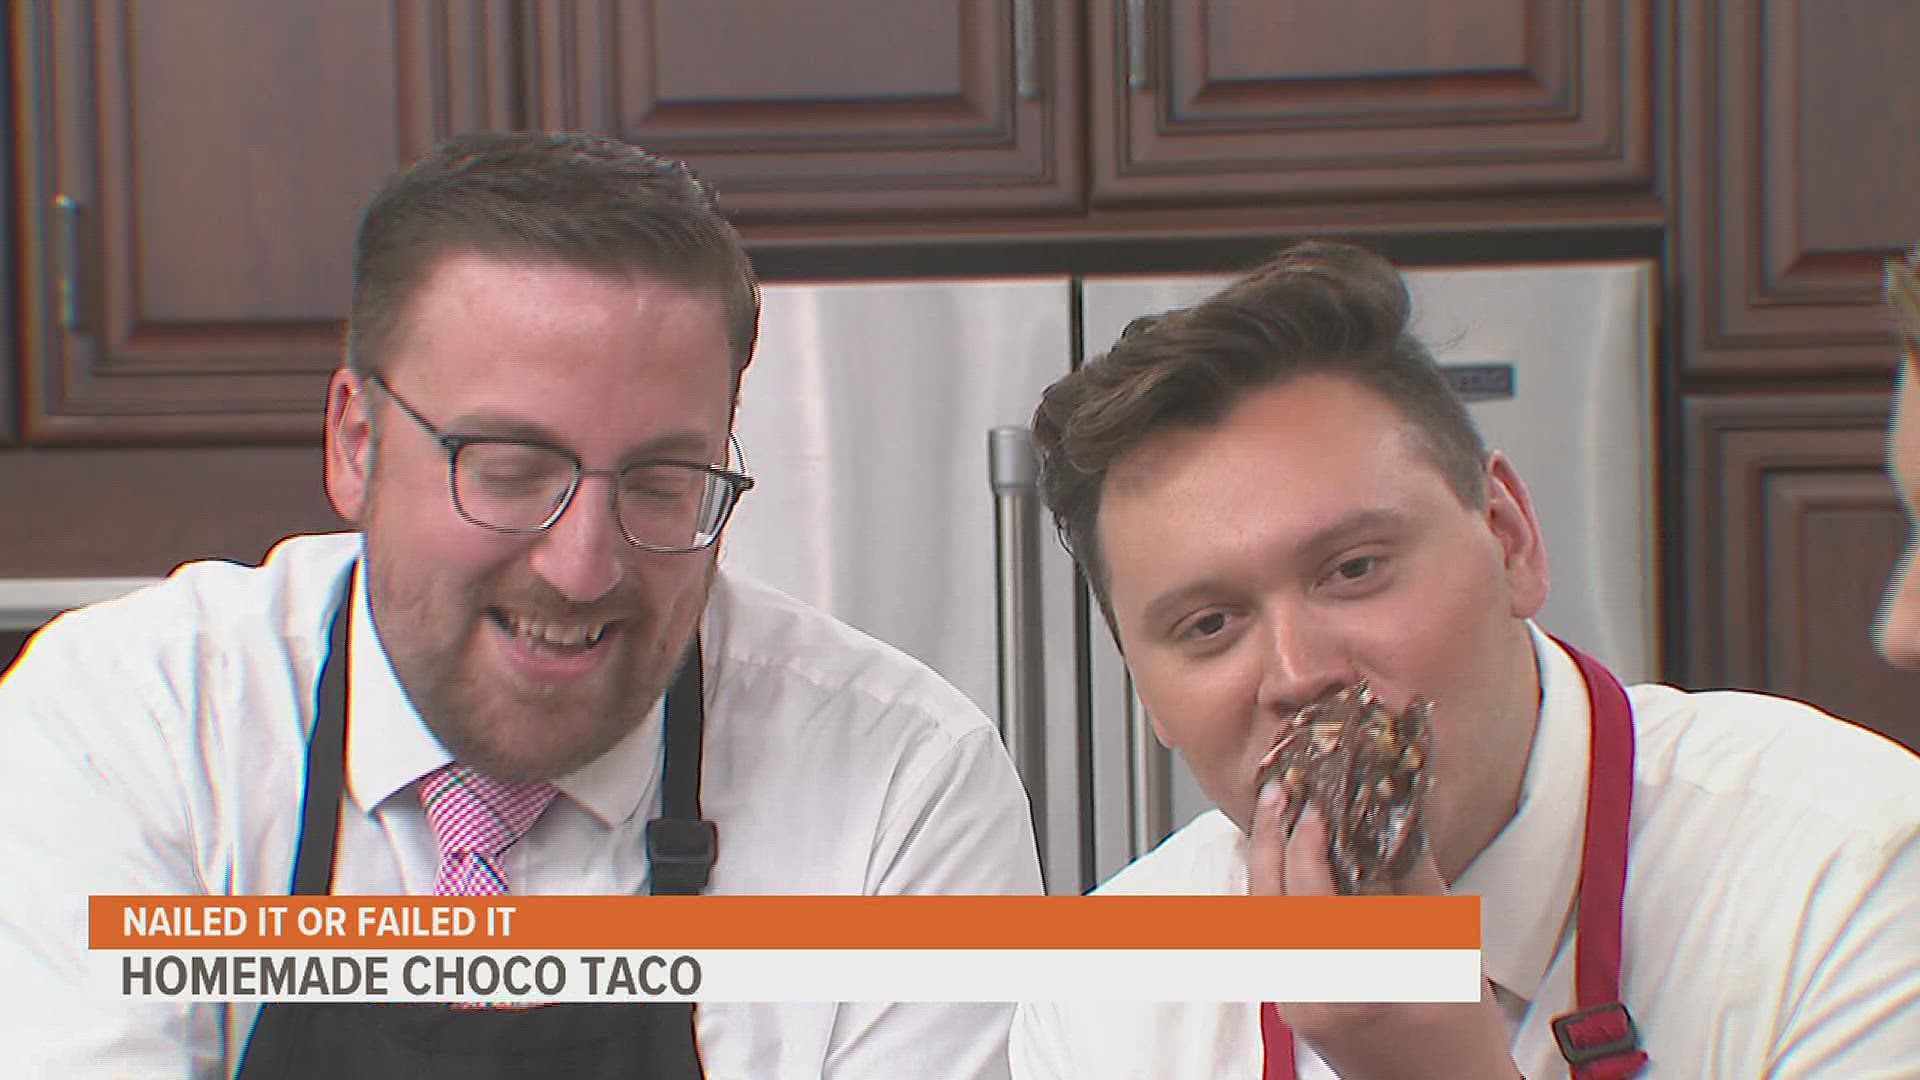 Klondike announced this week it was discontinuing the Choco Taco, so we decided to try to make our own at home.